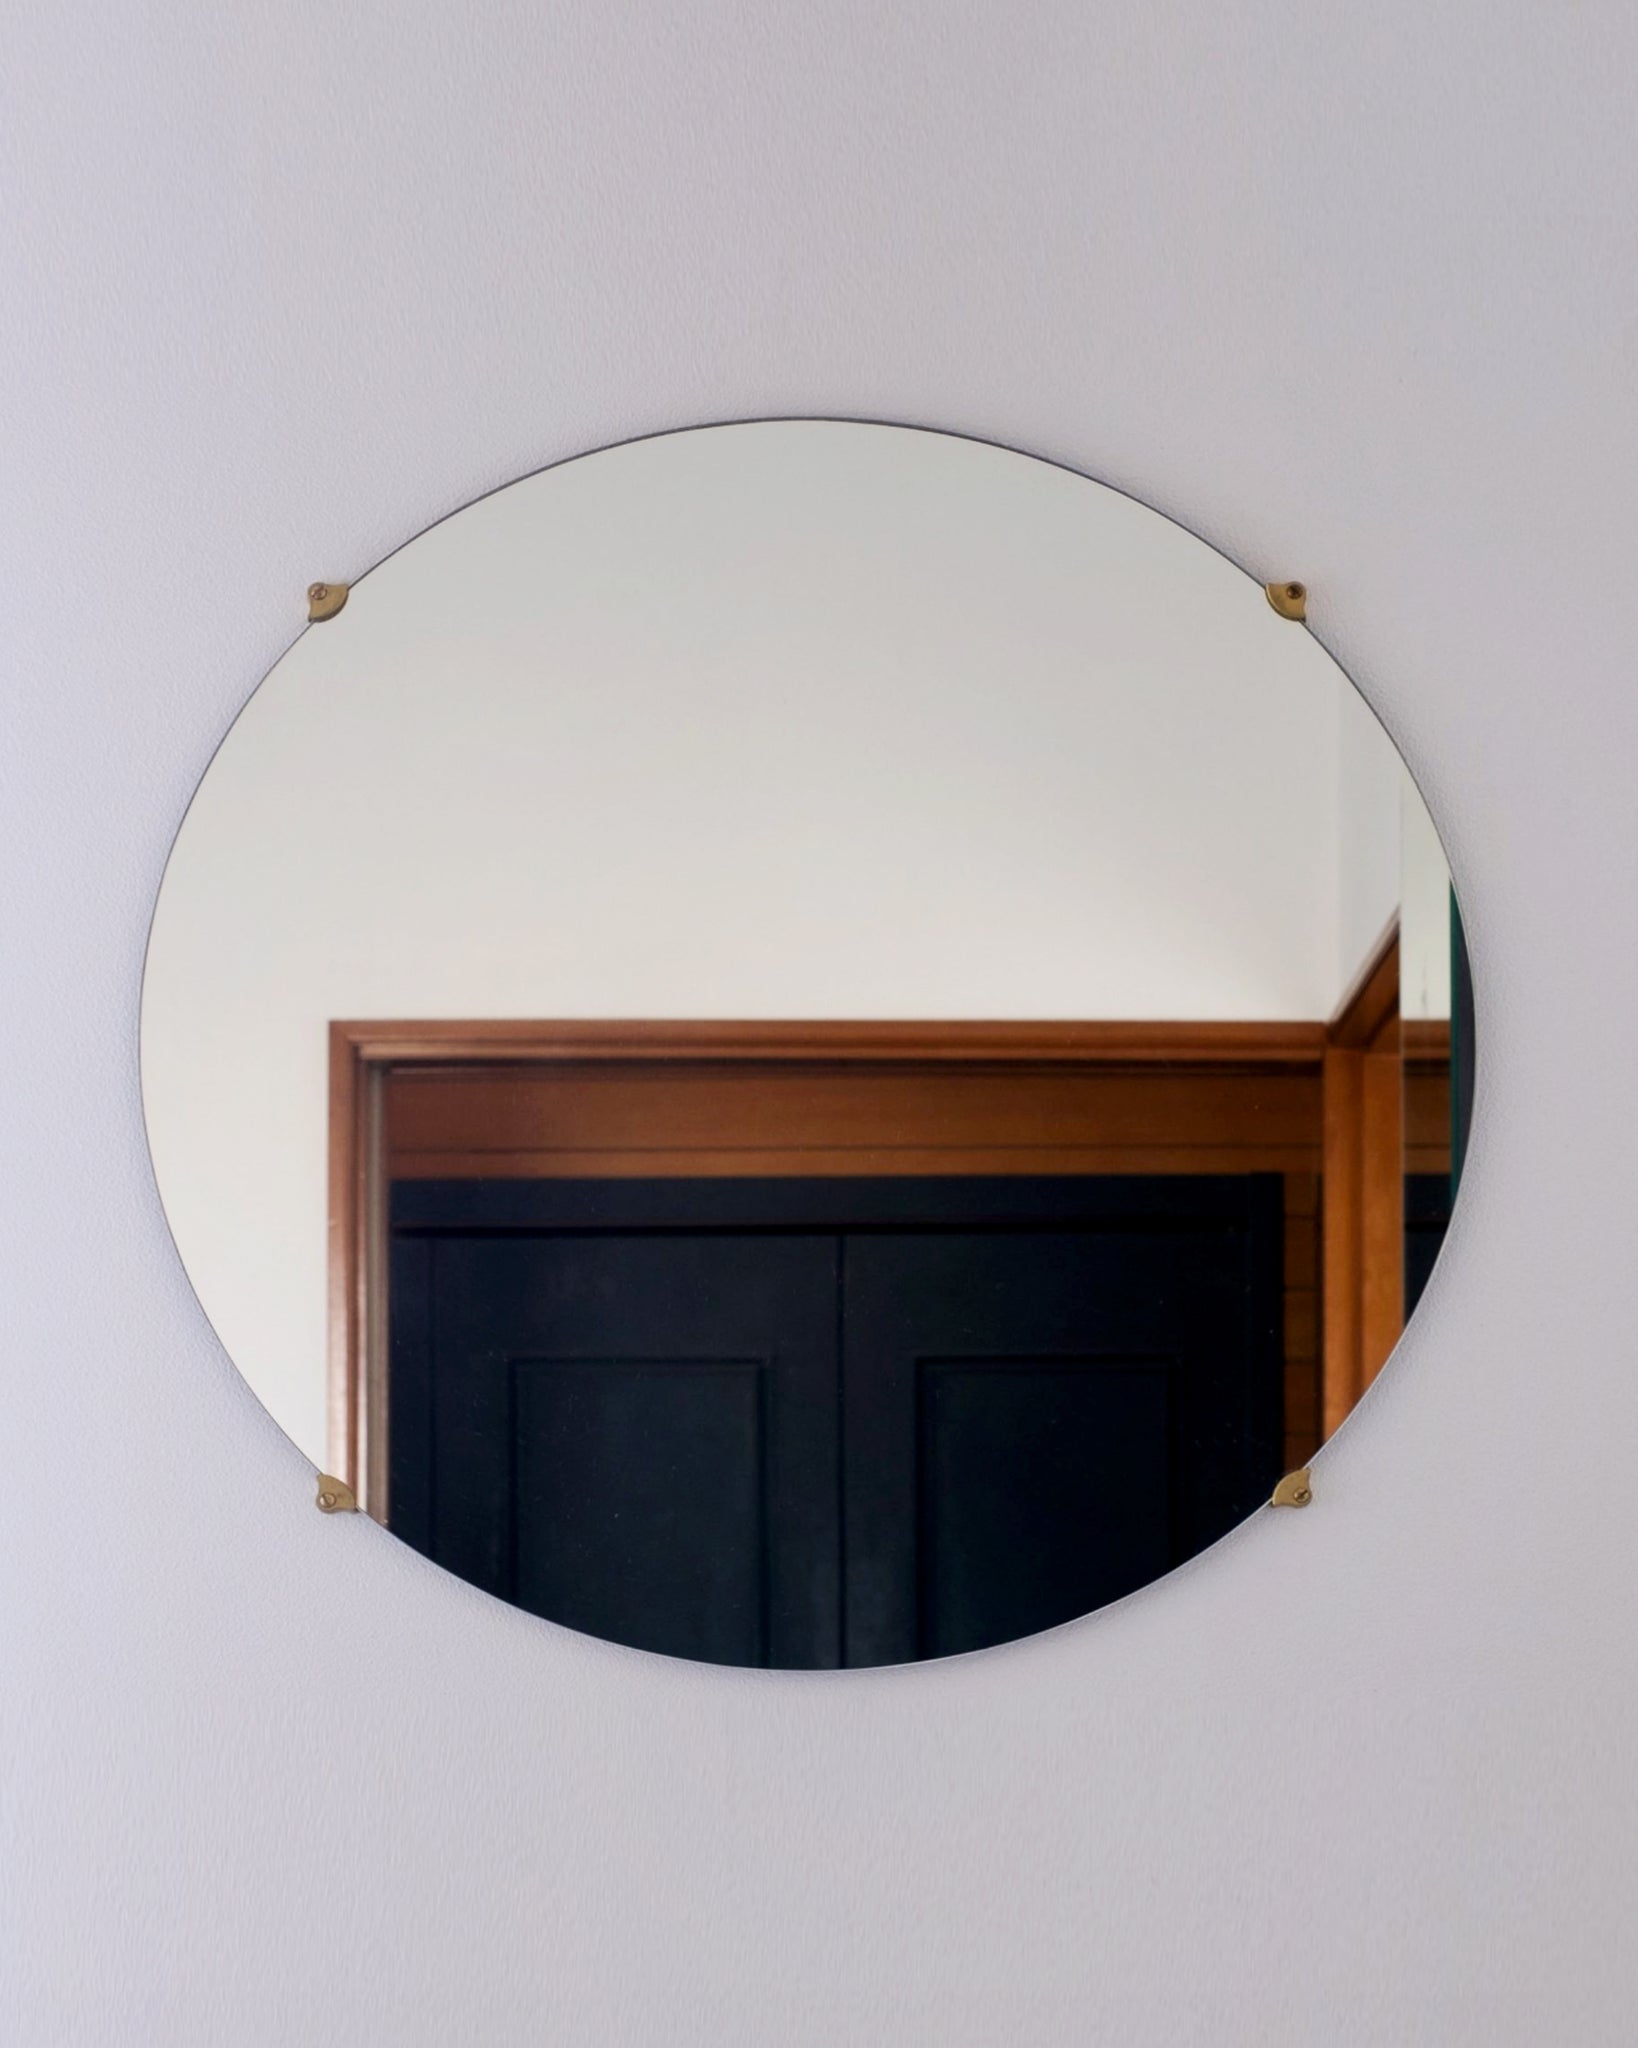 Round mirror installed on the wall with four matureware mirror stoppers. Black and brown wood door is reflected in the mirror.